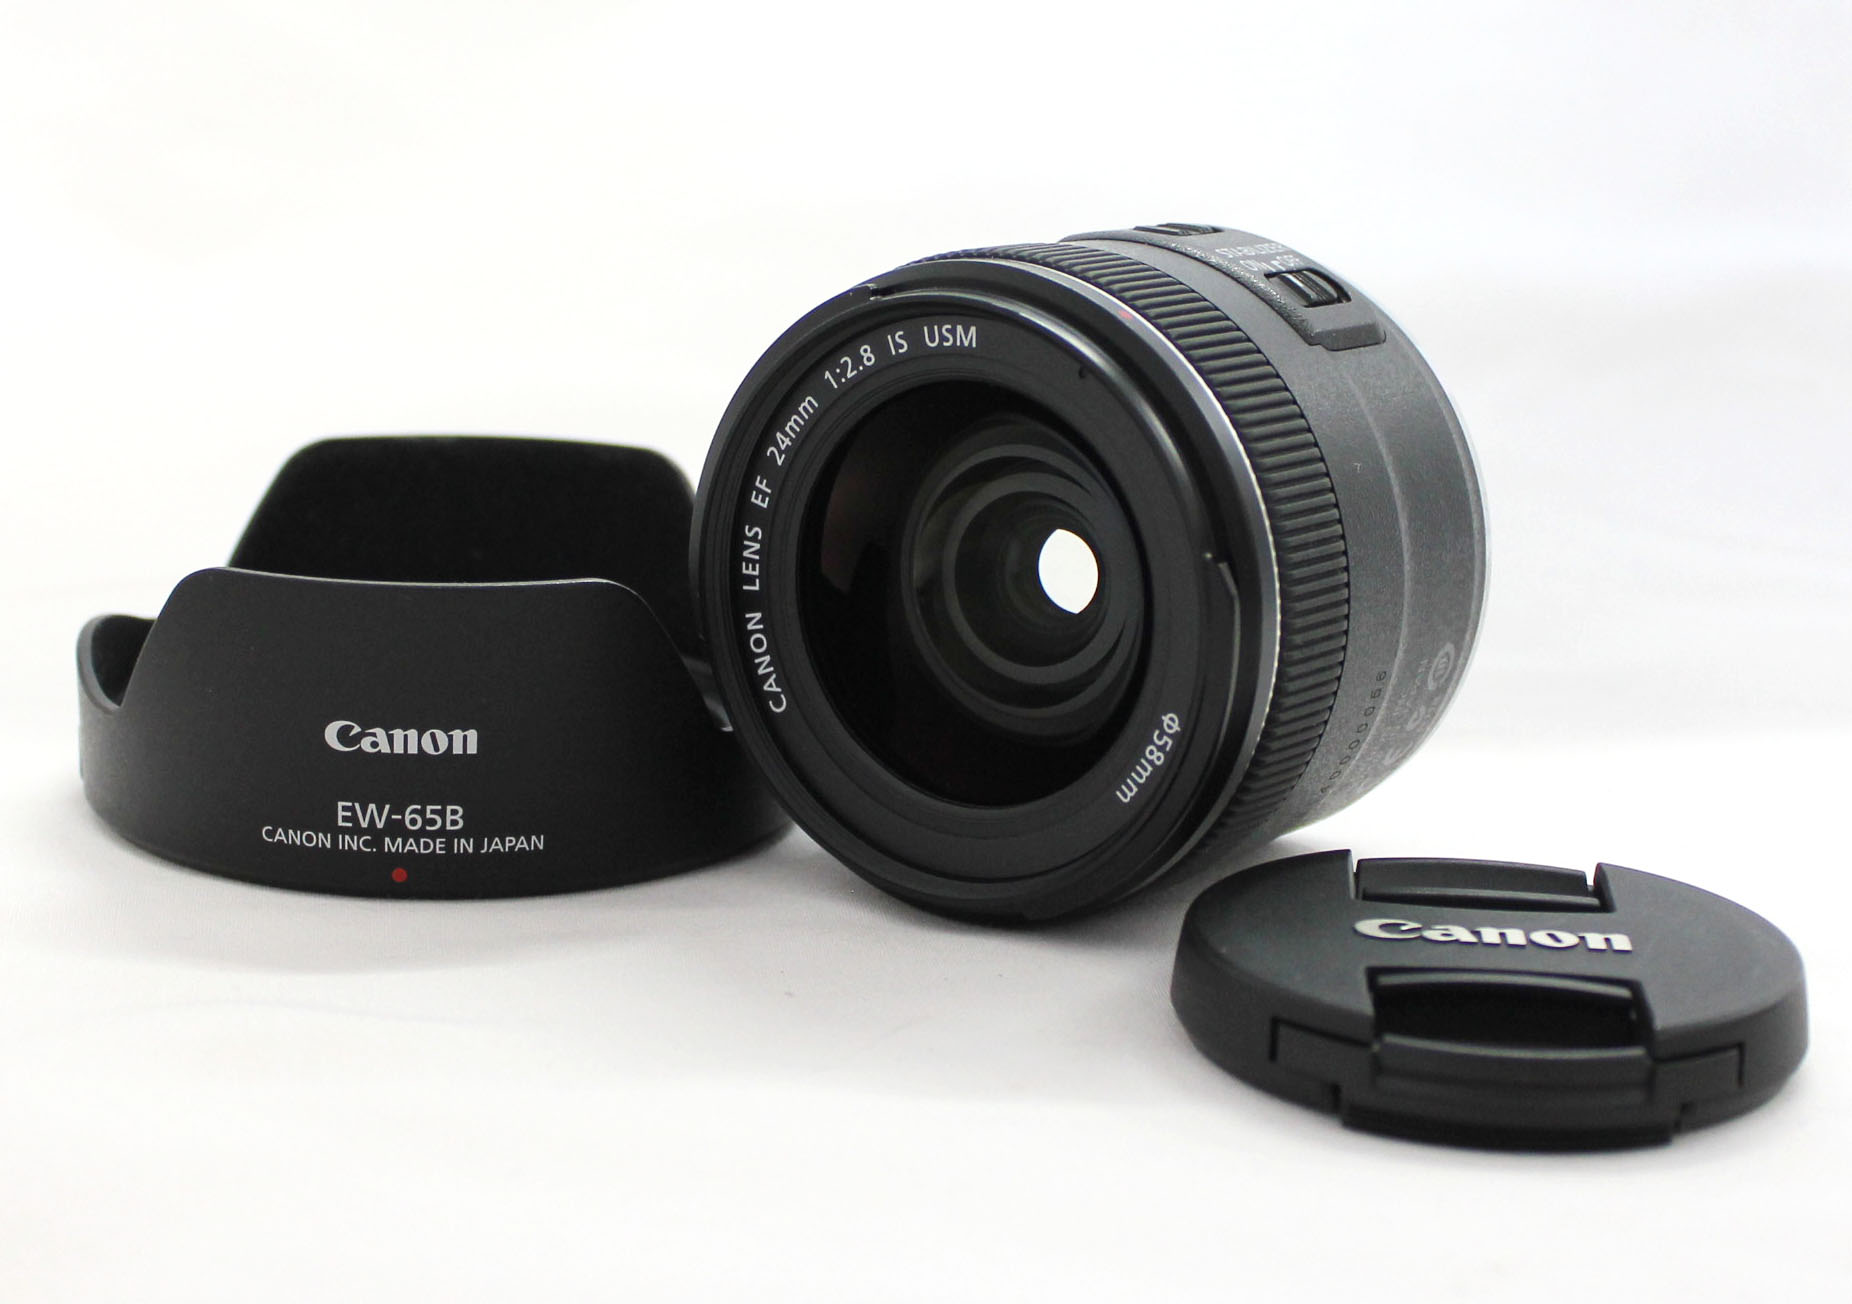 Japan Used Camera Shop | [Near Mint] Canon EF 24mm F/2.8 IS USM AF/MF Wide Angle Lens with Hood EW-65B from Japan